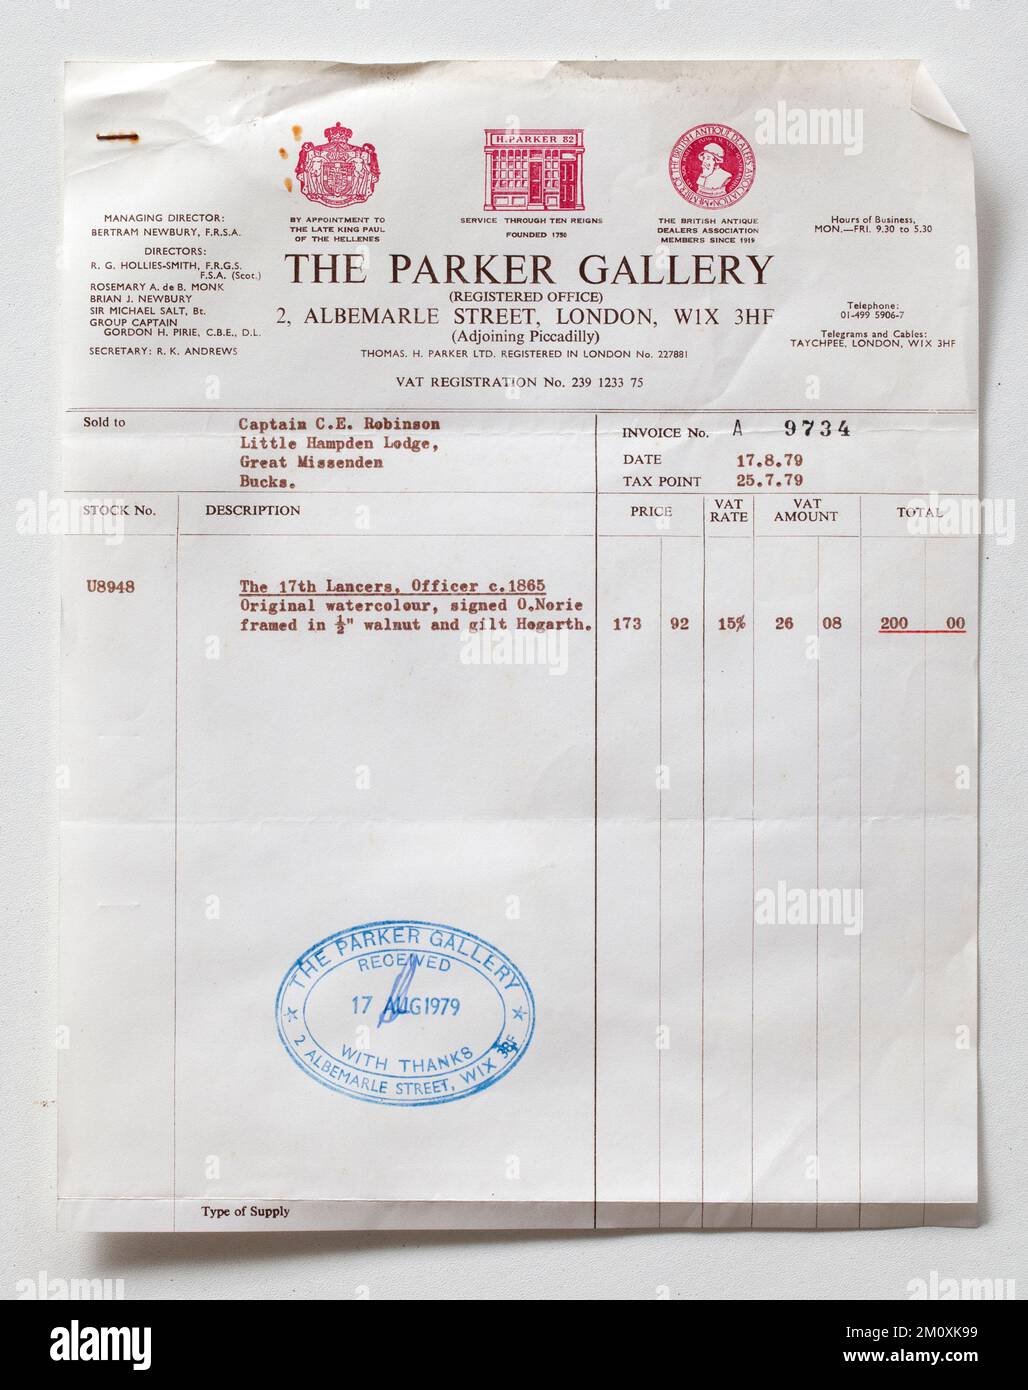 1970s Art Gallery Sales Receipt for a Watercolor Painting from the Parker Gallery Albemarle Street London Banque D'Images